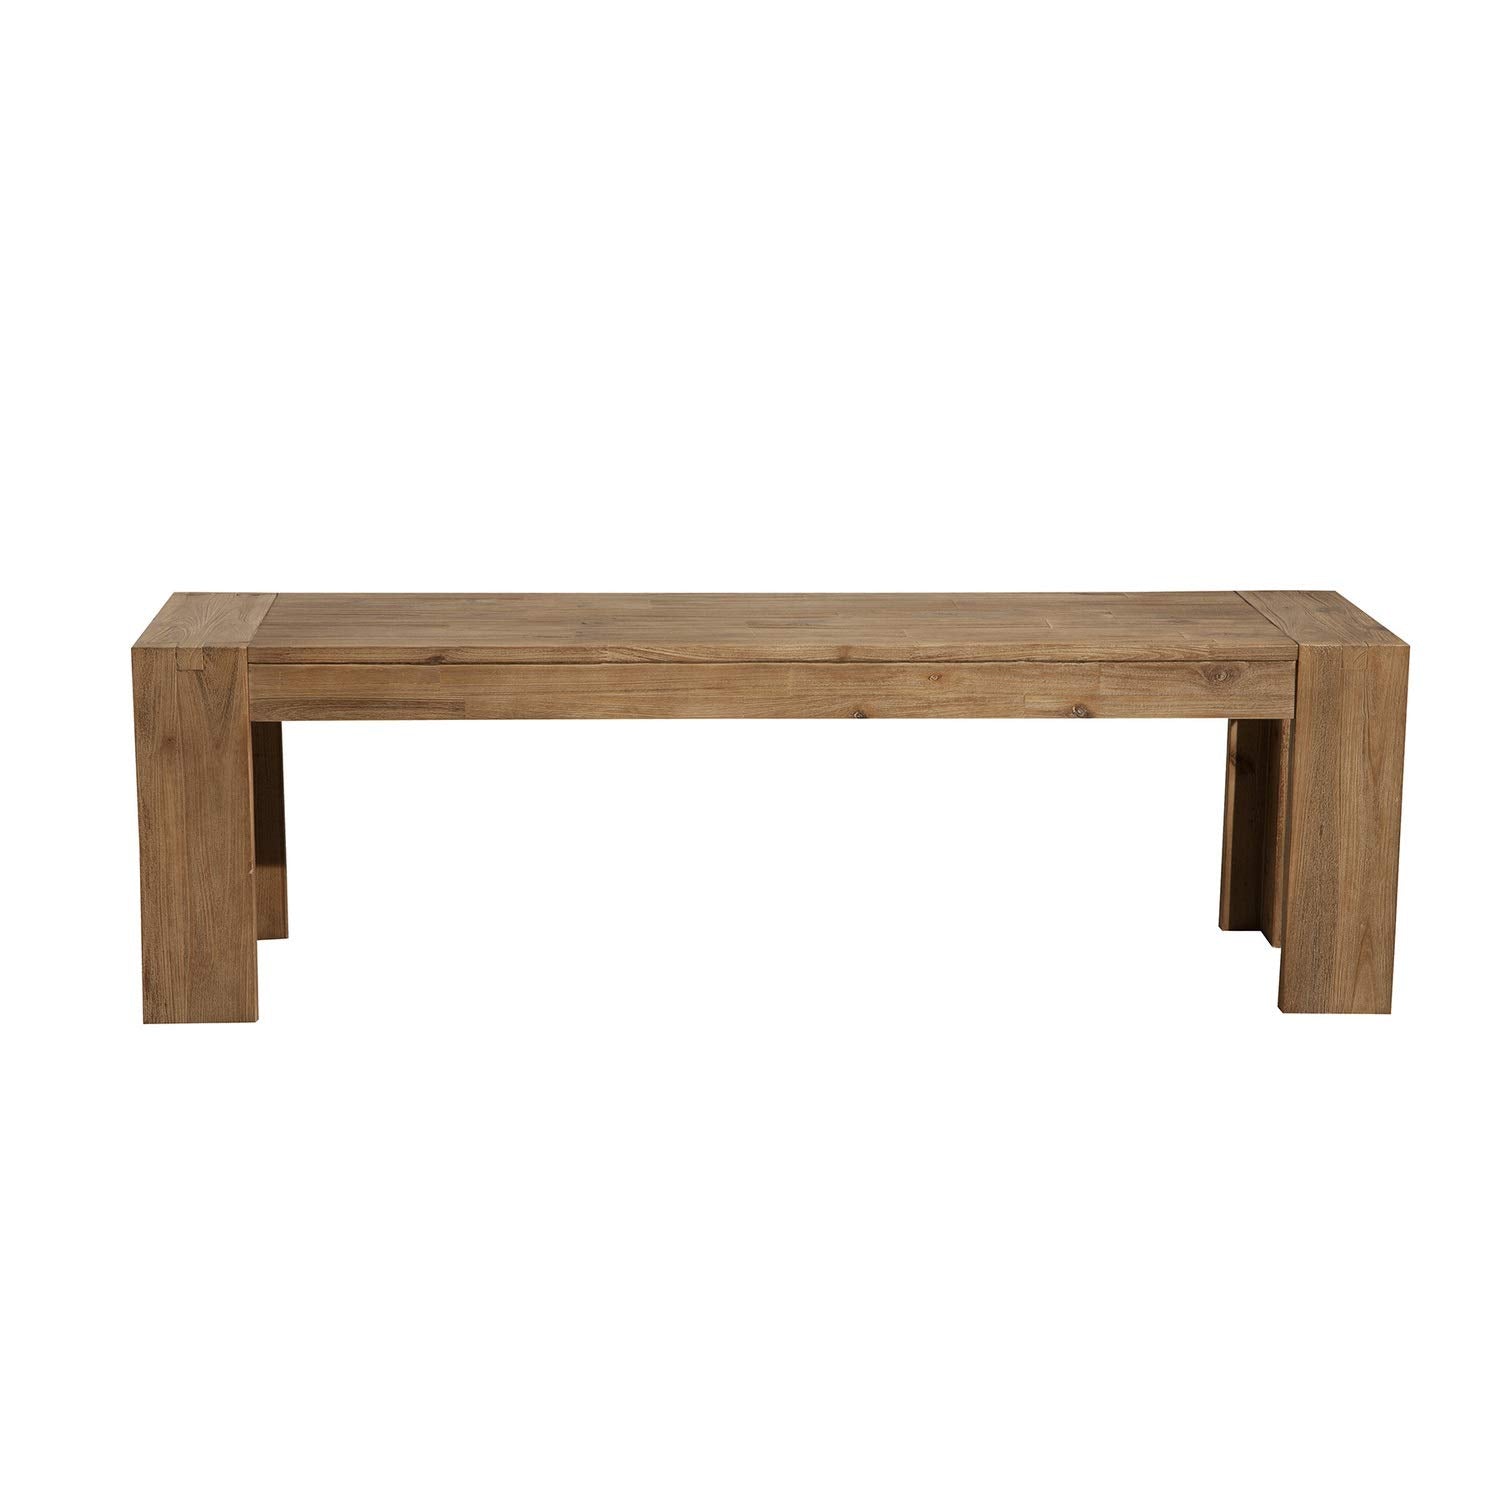 Alpine Furniture Seashore Wood Dining Bench in Antique Natural (Brown)